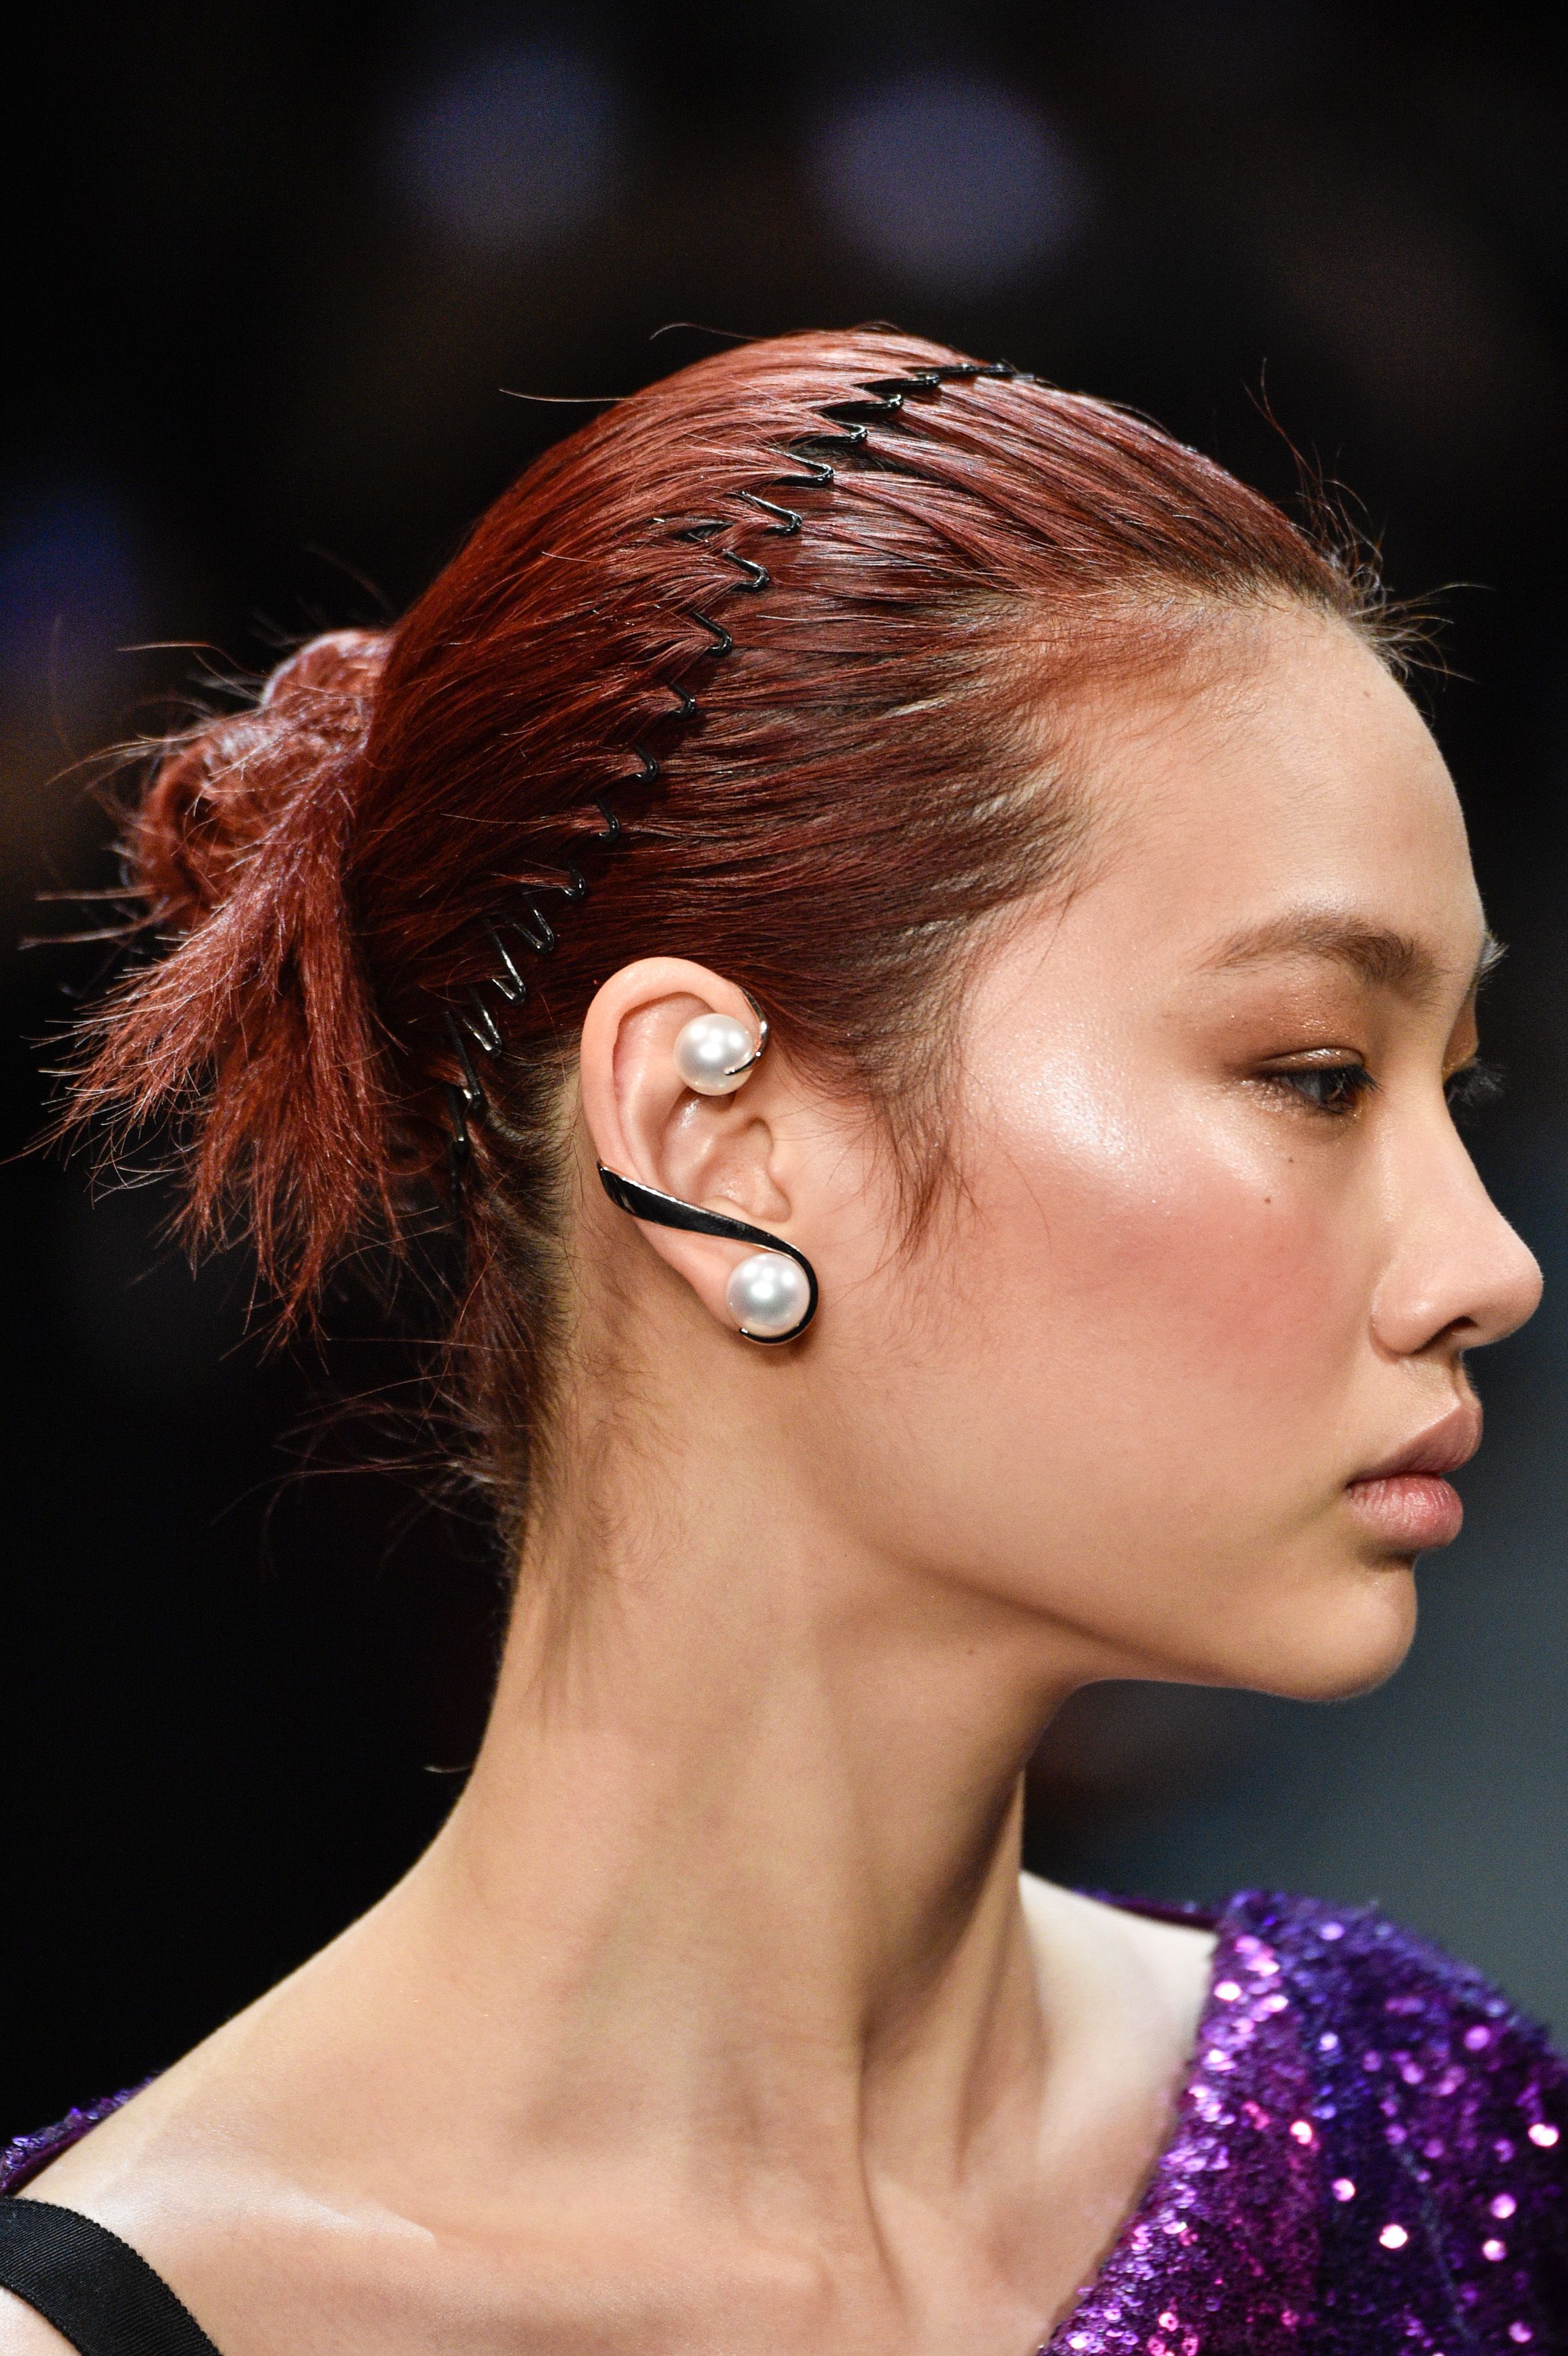 10 weird fashion accessories that made it on the runway